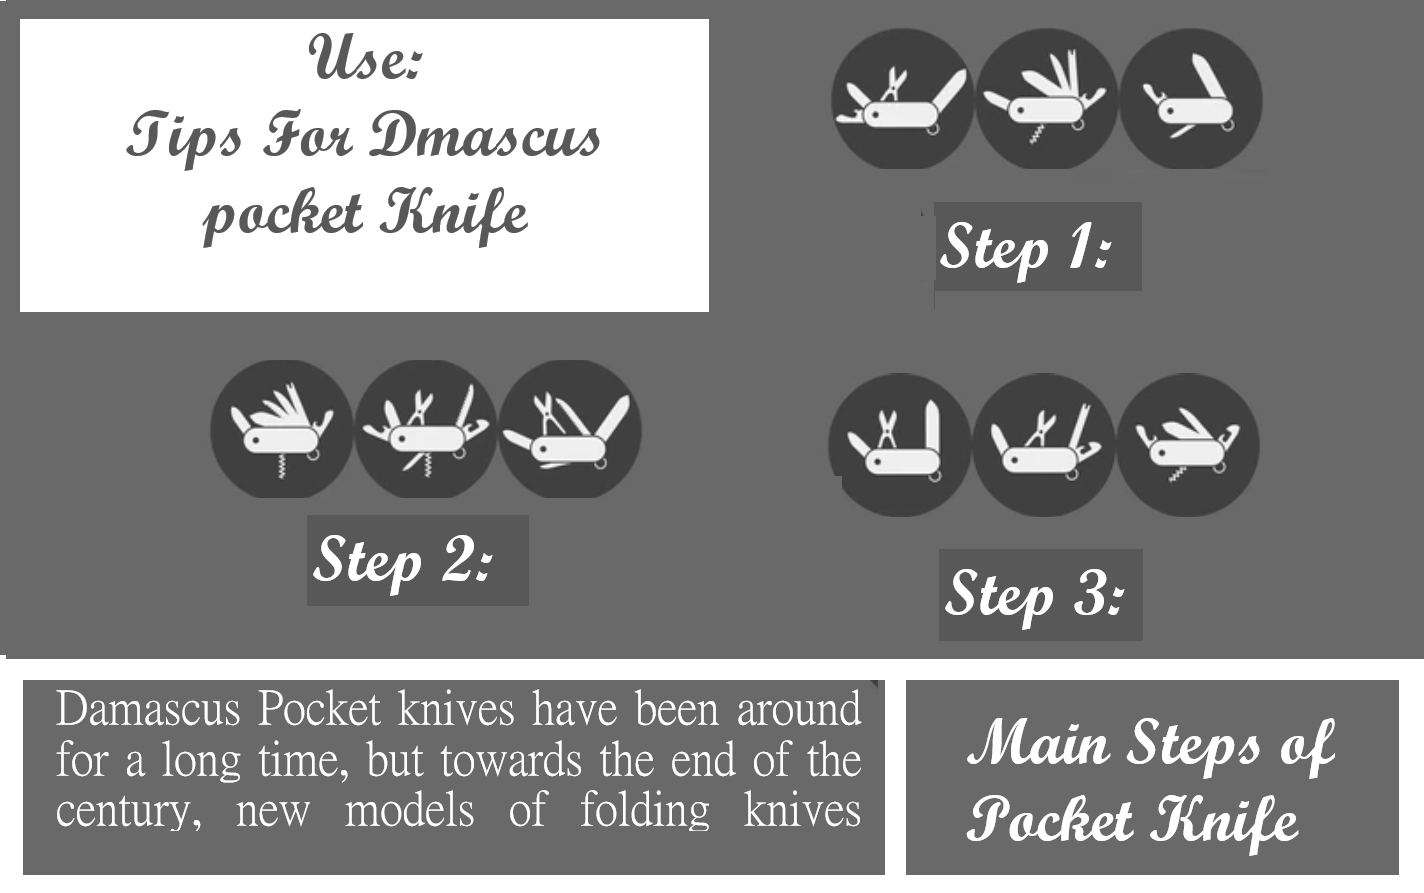 What are Main Uses of Damascus Pocket Knives